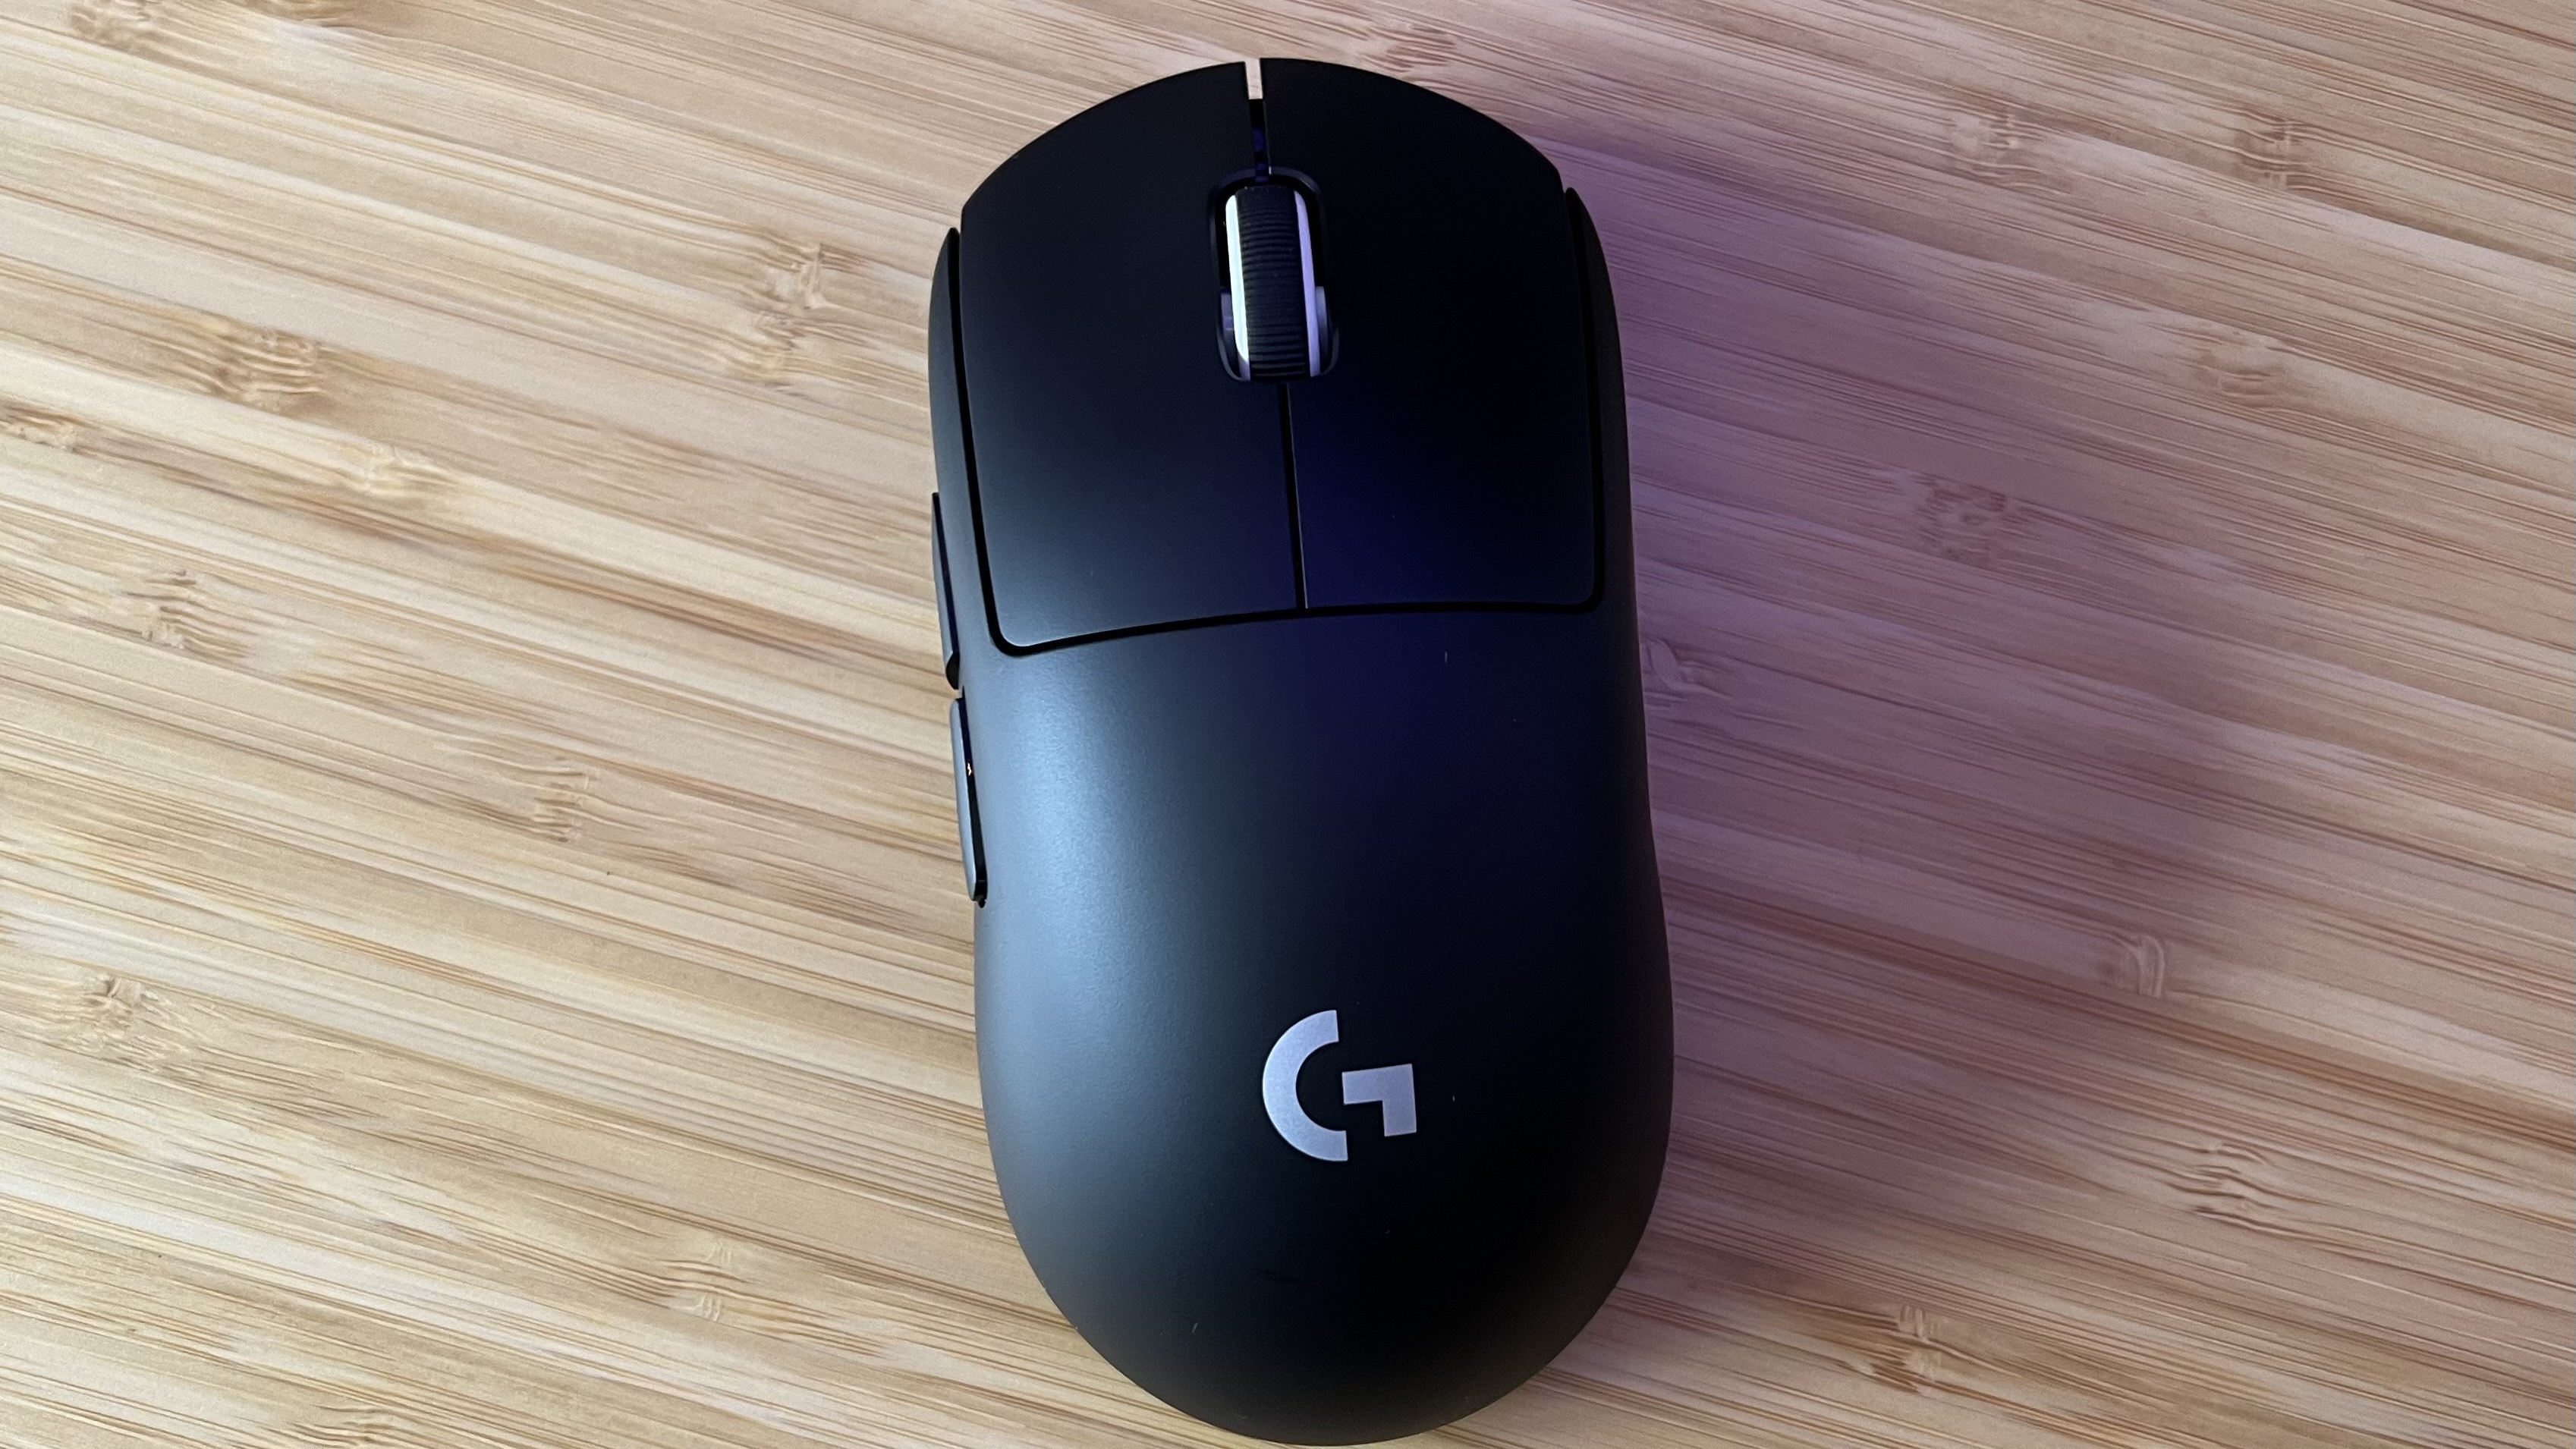 Top down view of the Logitech G Pro X Superlight 2 mouse on a wooden desk